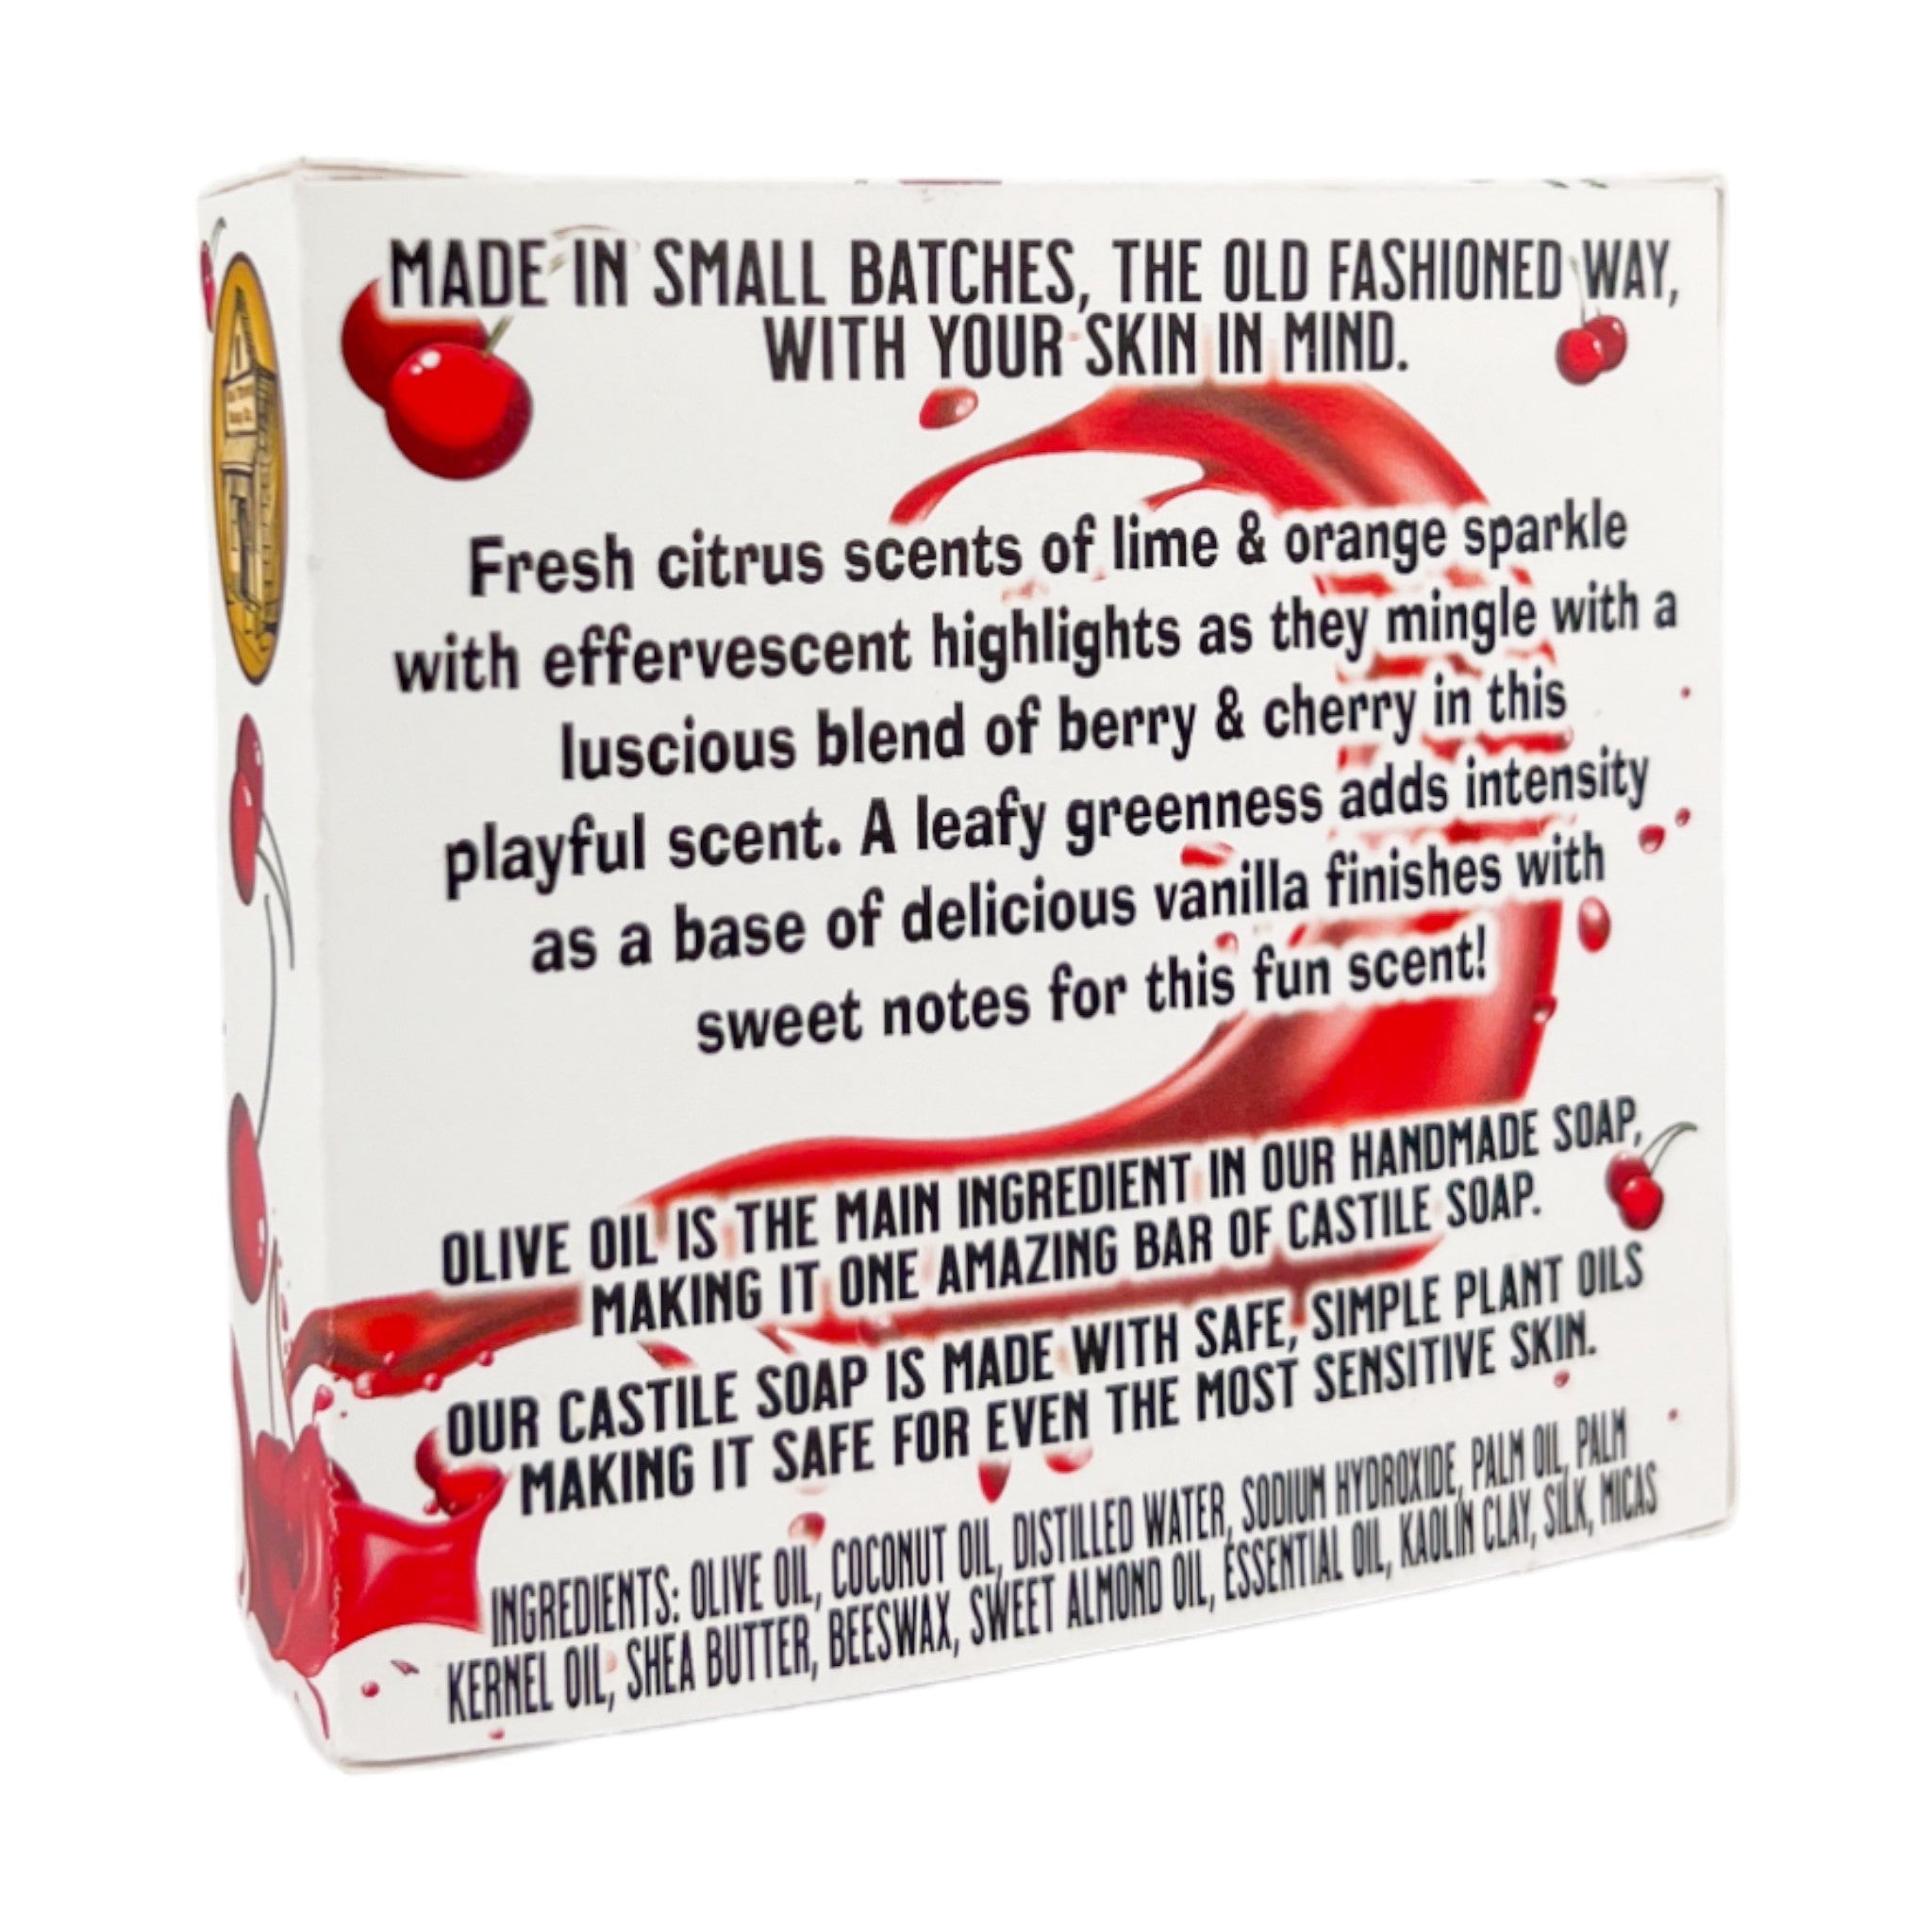 Bite Me -Bar Soap - Old Town Soap Co.